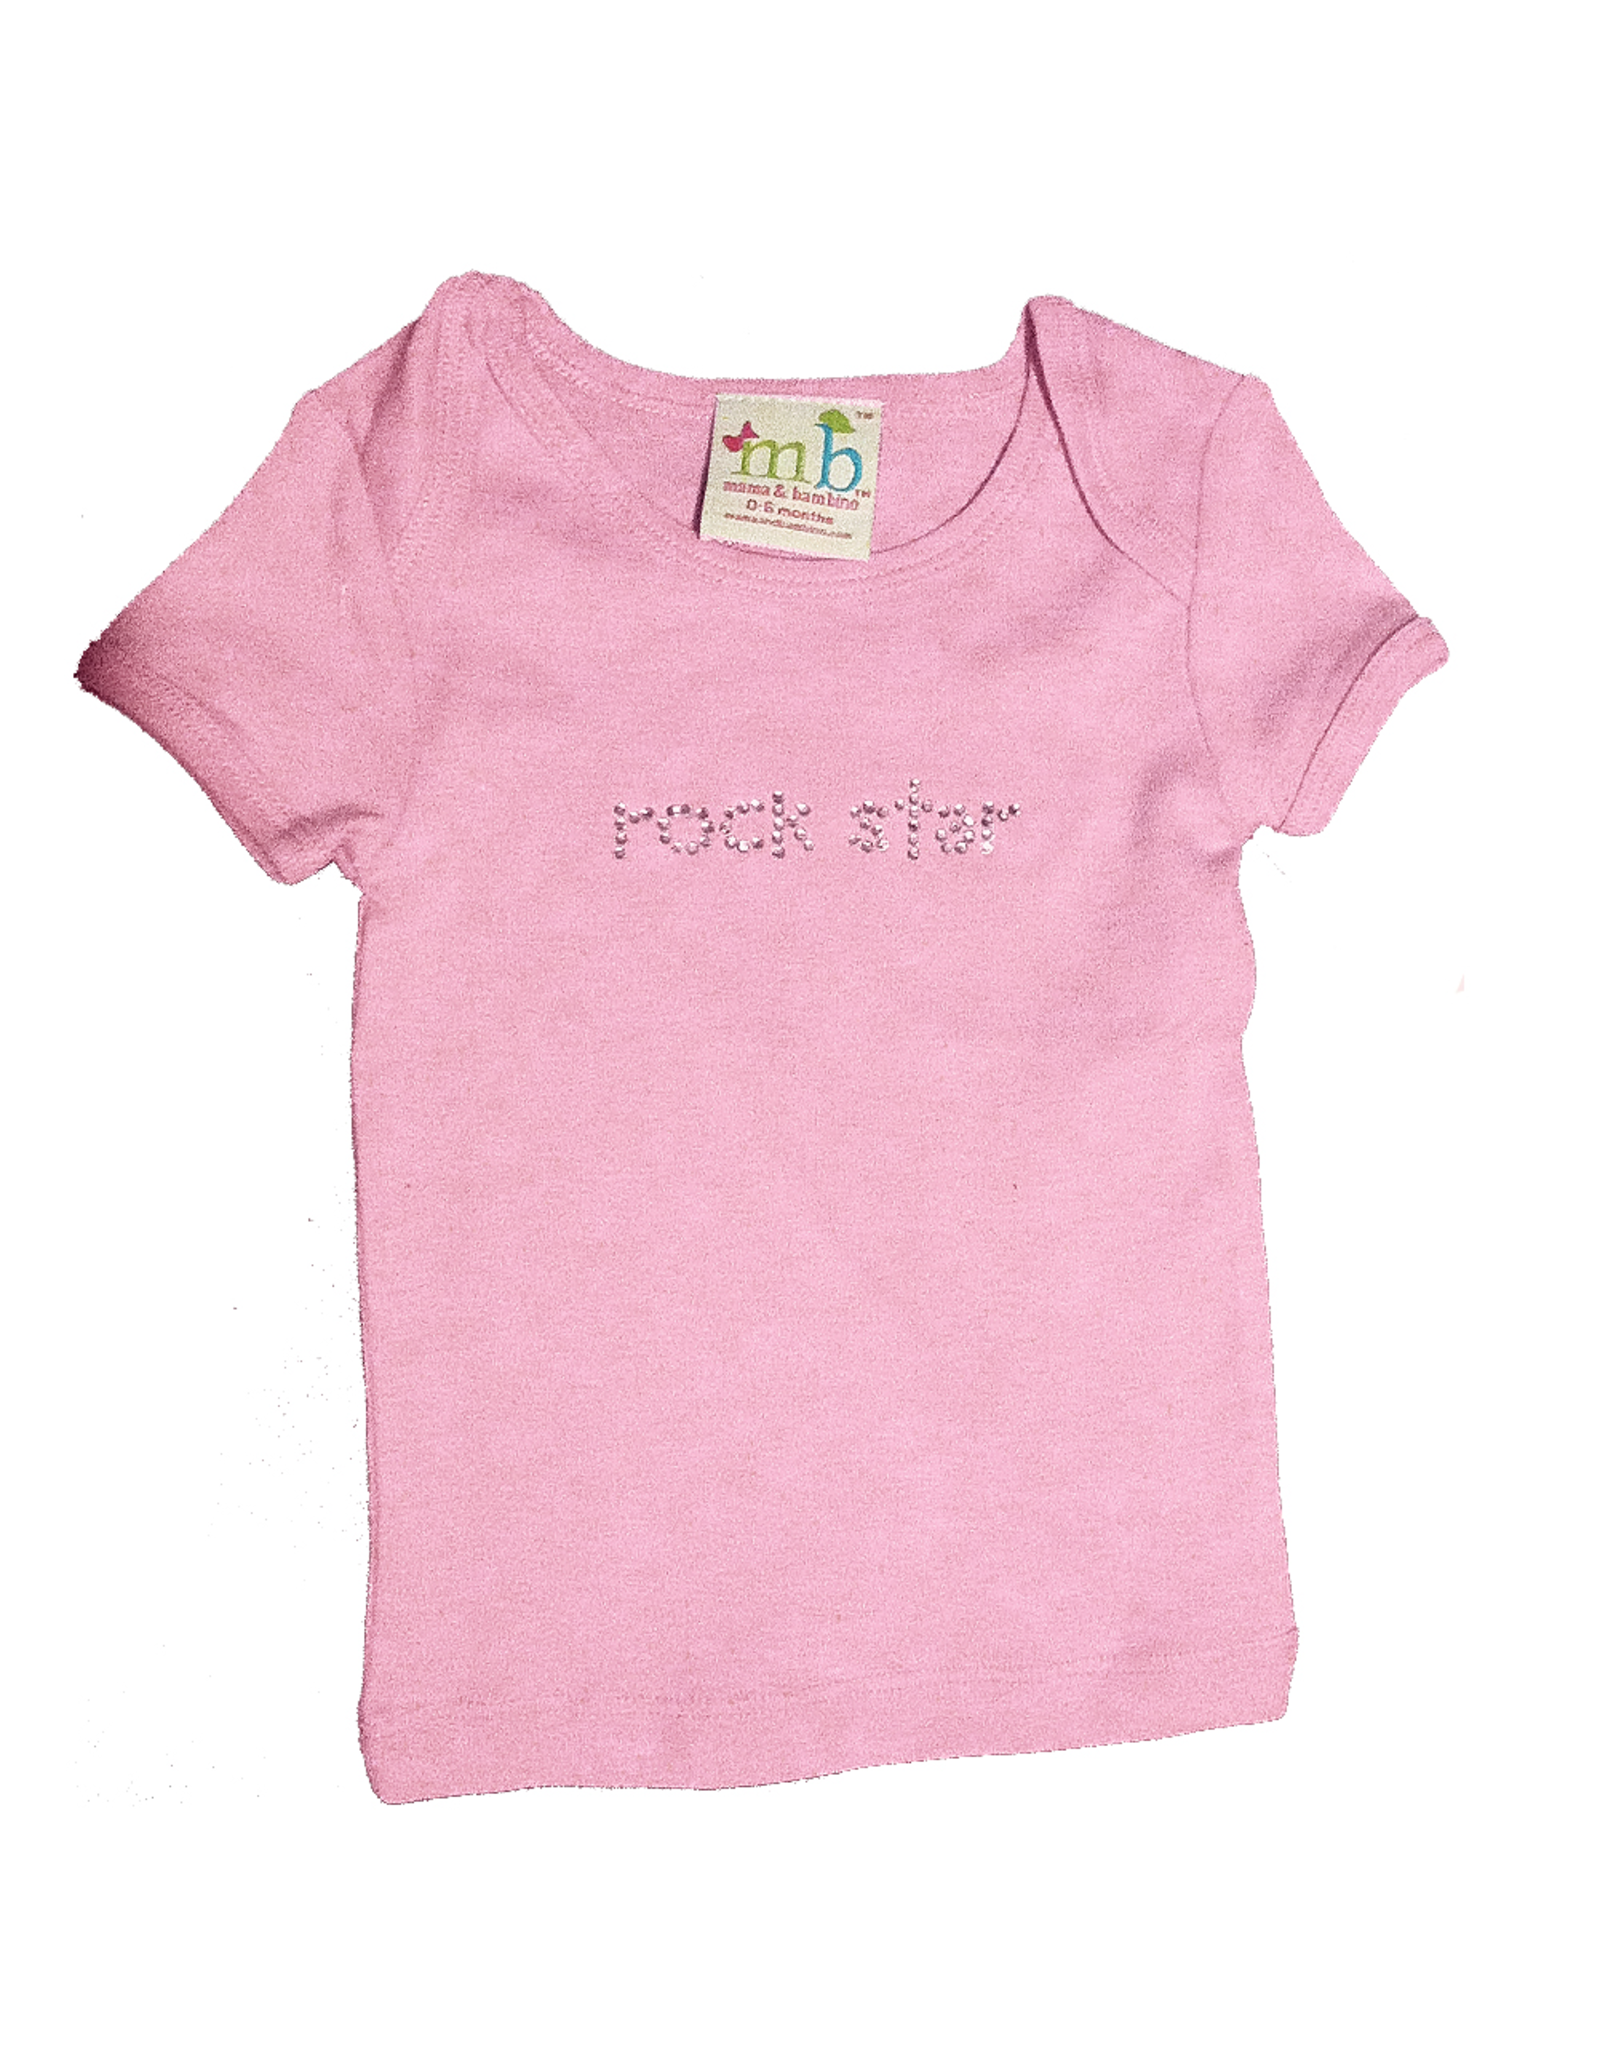 Childs Pink I Luv My Hubby Sparkle Stone T-Shirt Size 4/6 on eBid